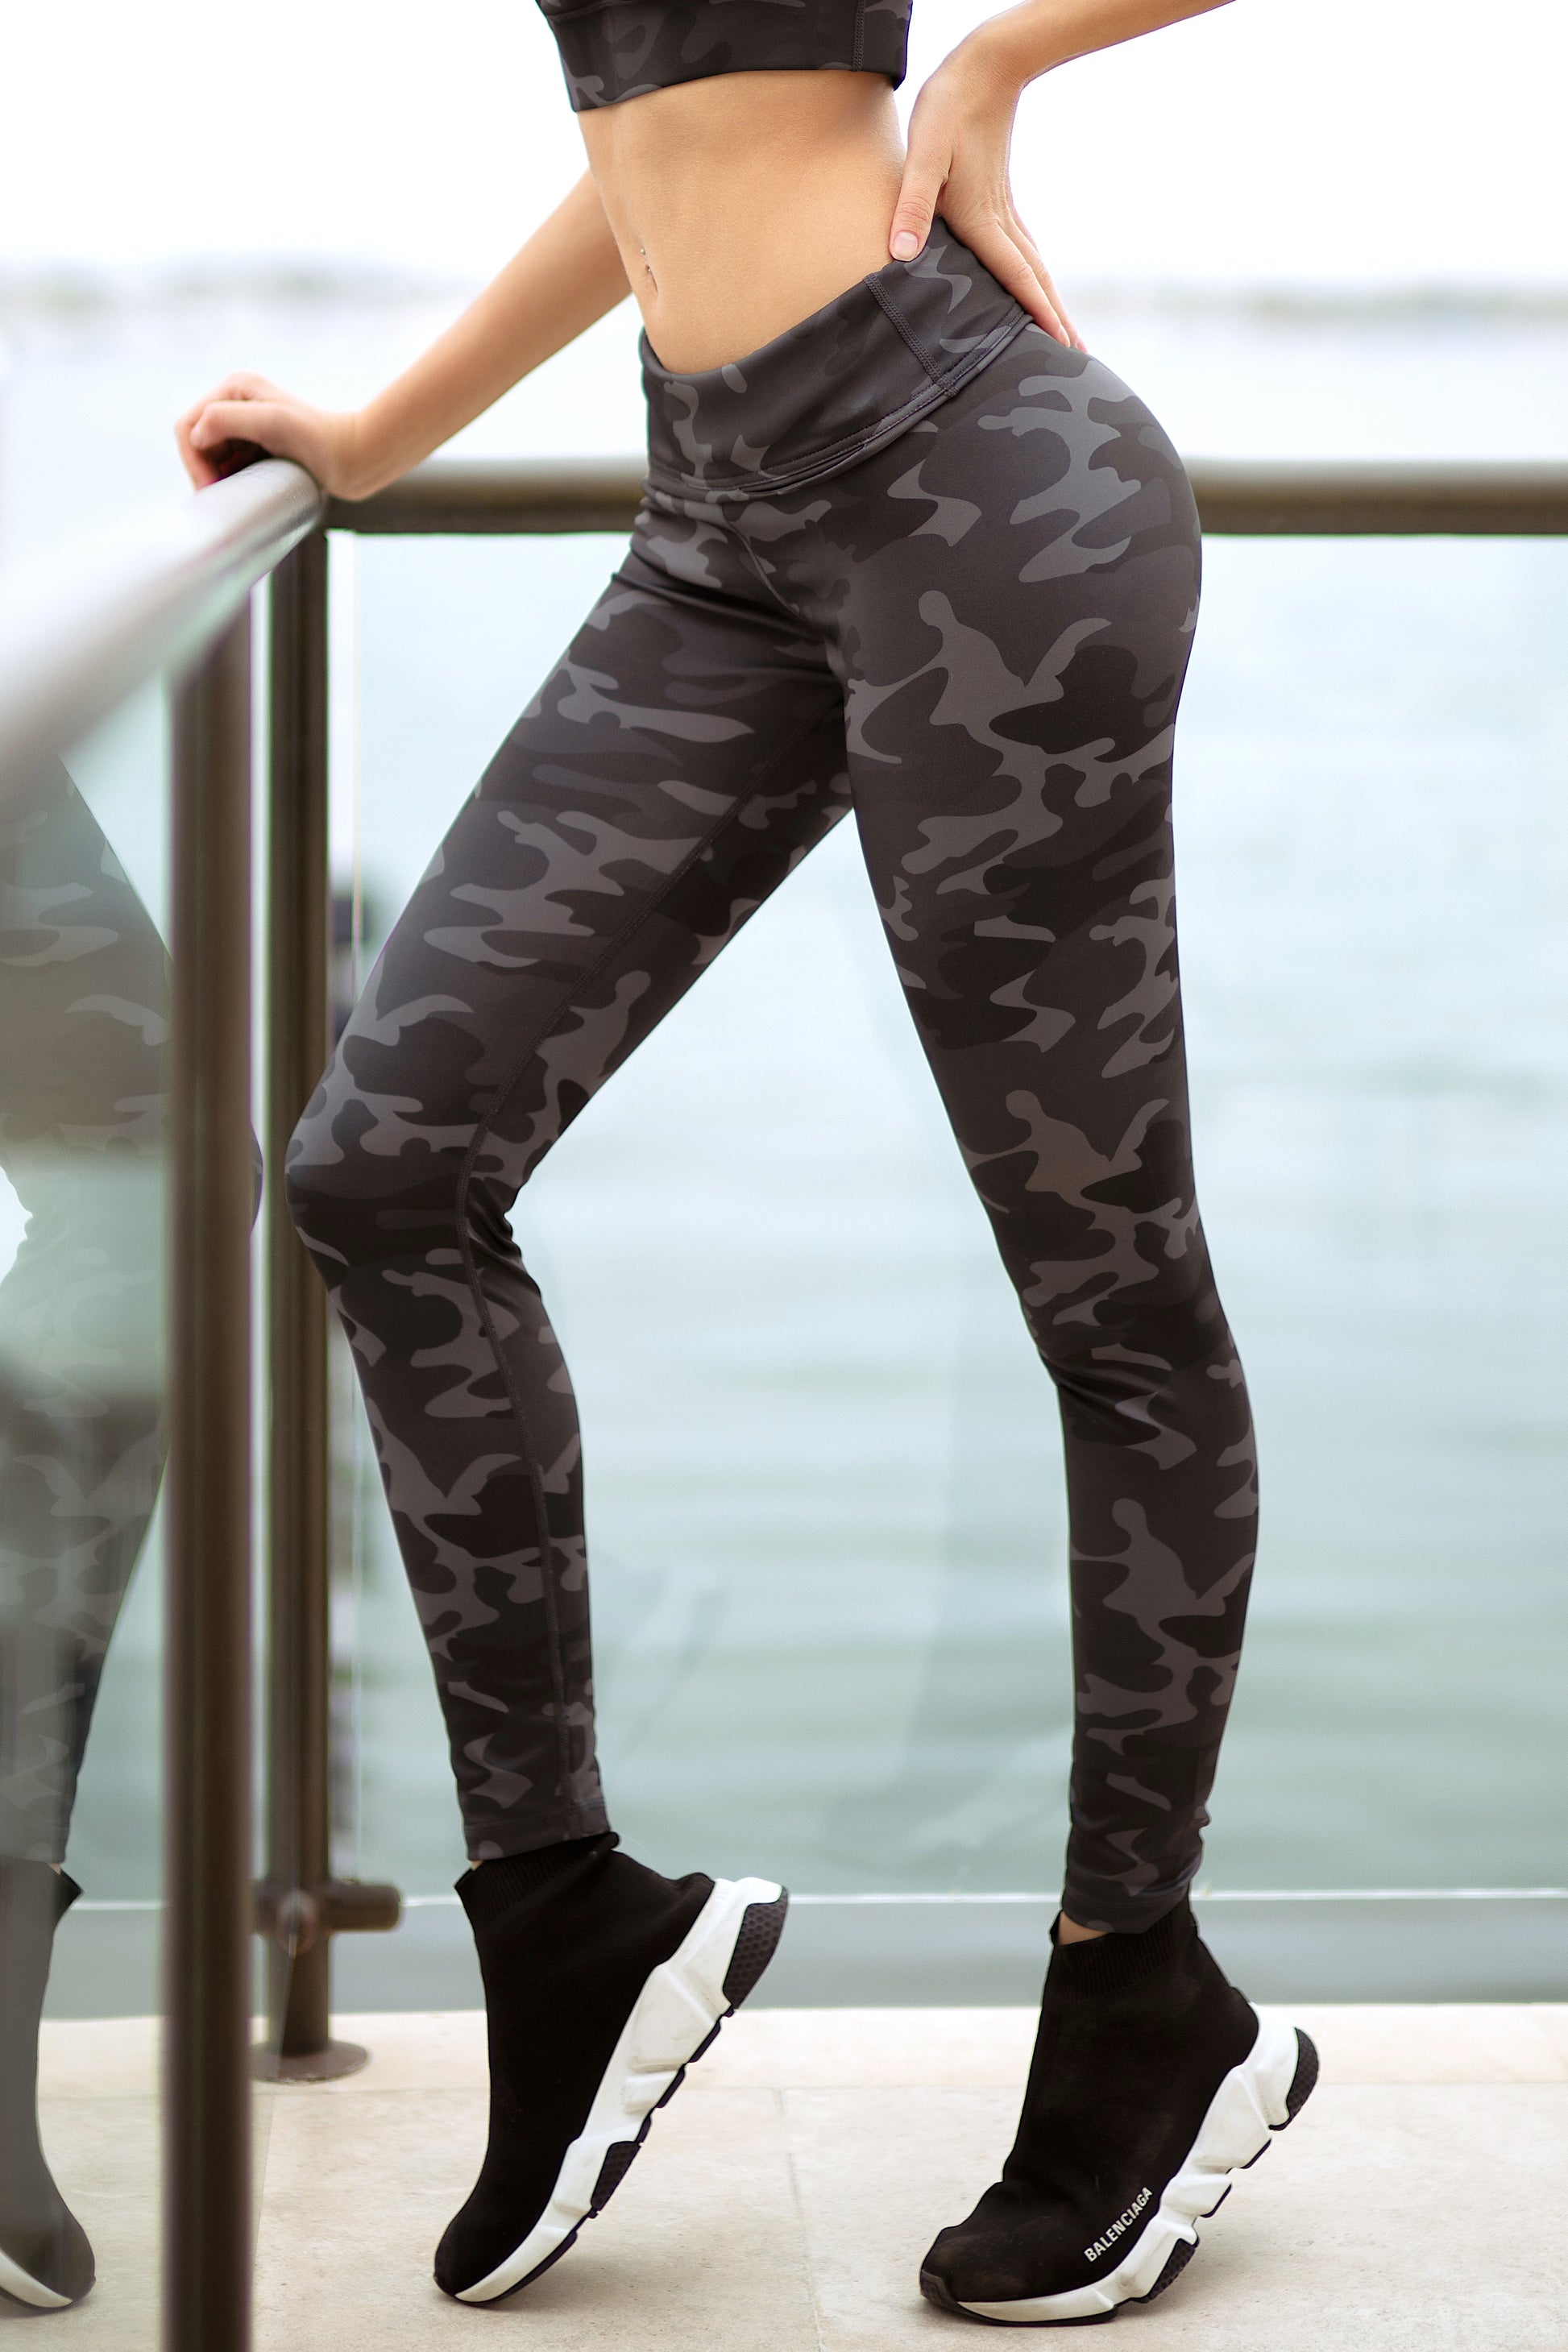 Forge Fit High Waisted Yoga Leggings